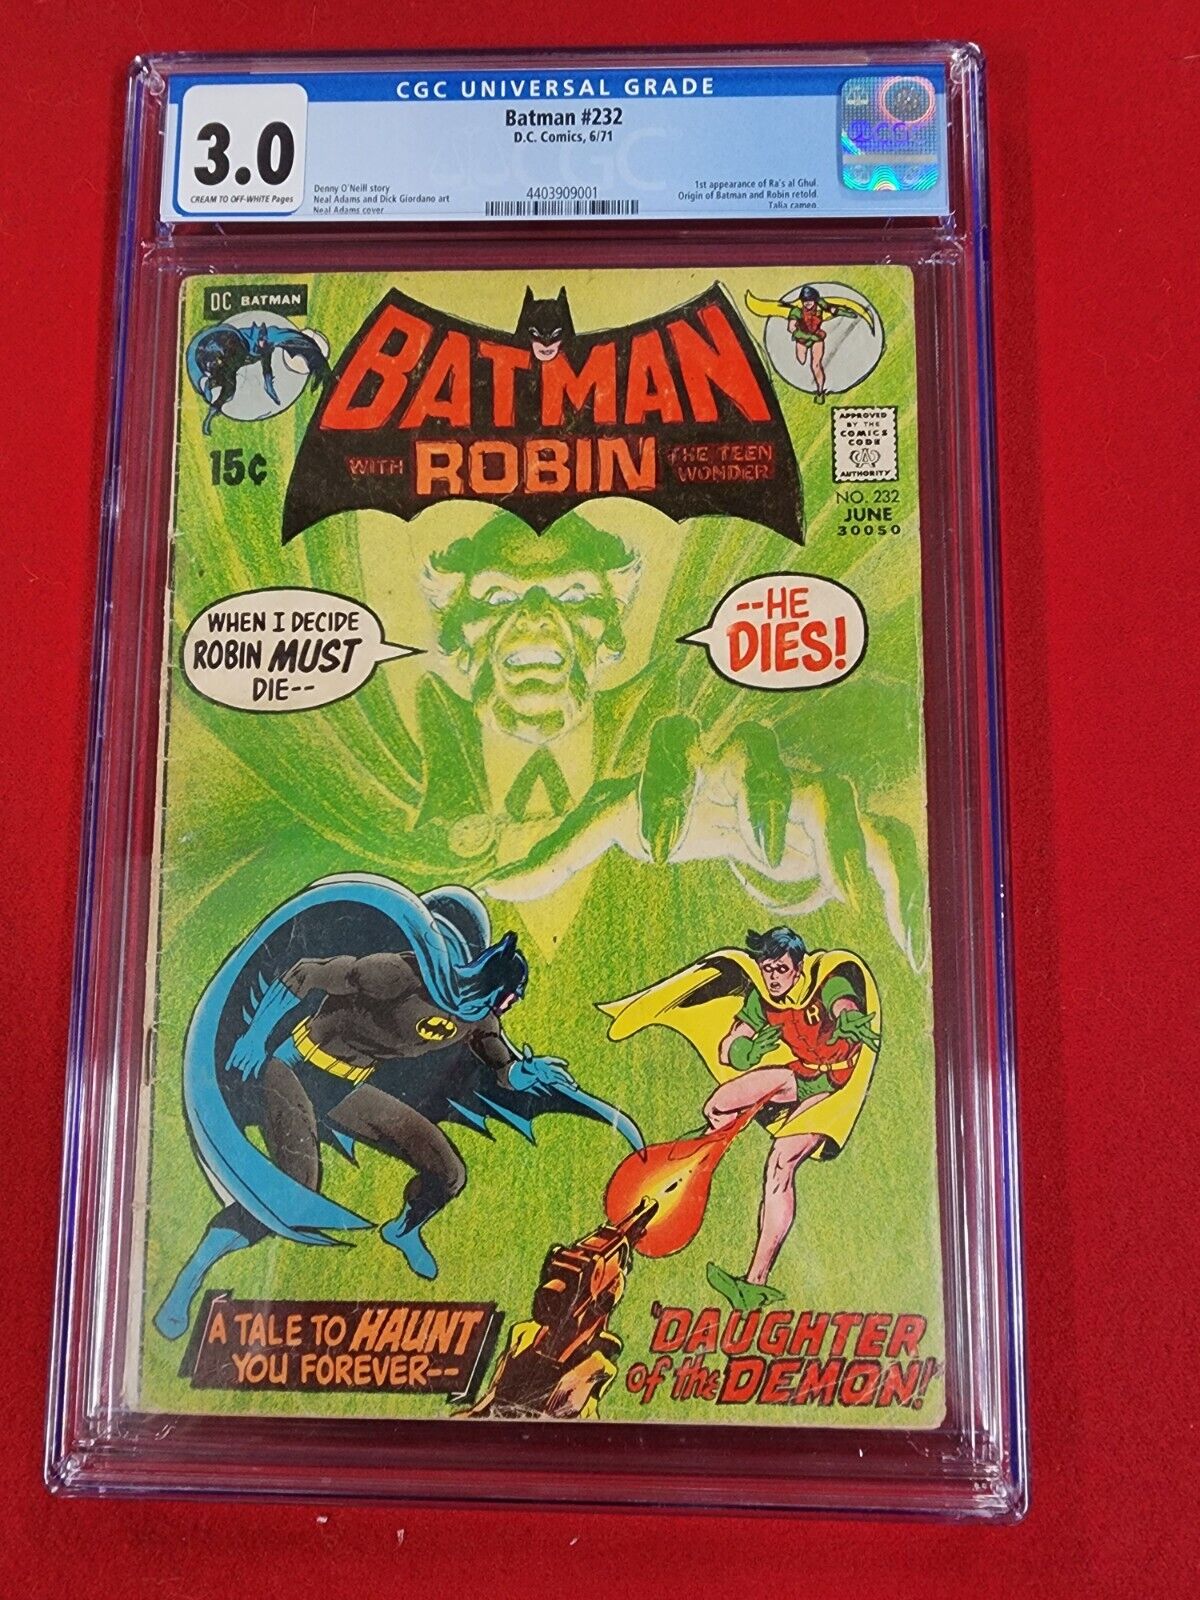 batman #232 cgc 3.0 Cream/ OW Pages (first appearance of Ra’s al Ghul) 1971.